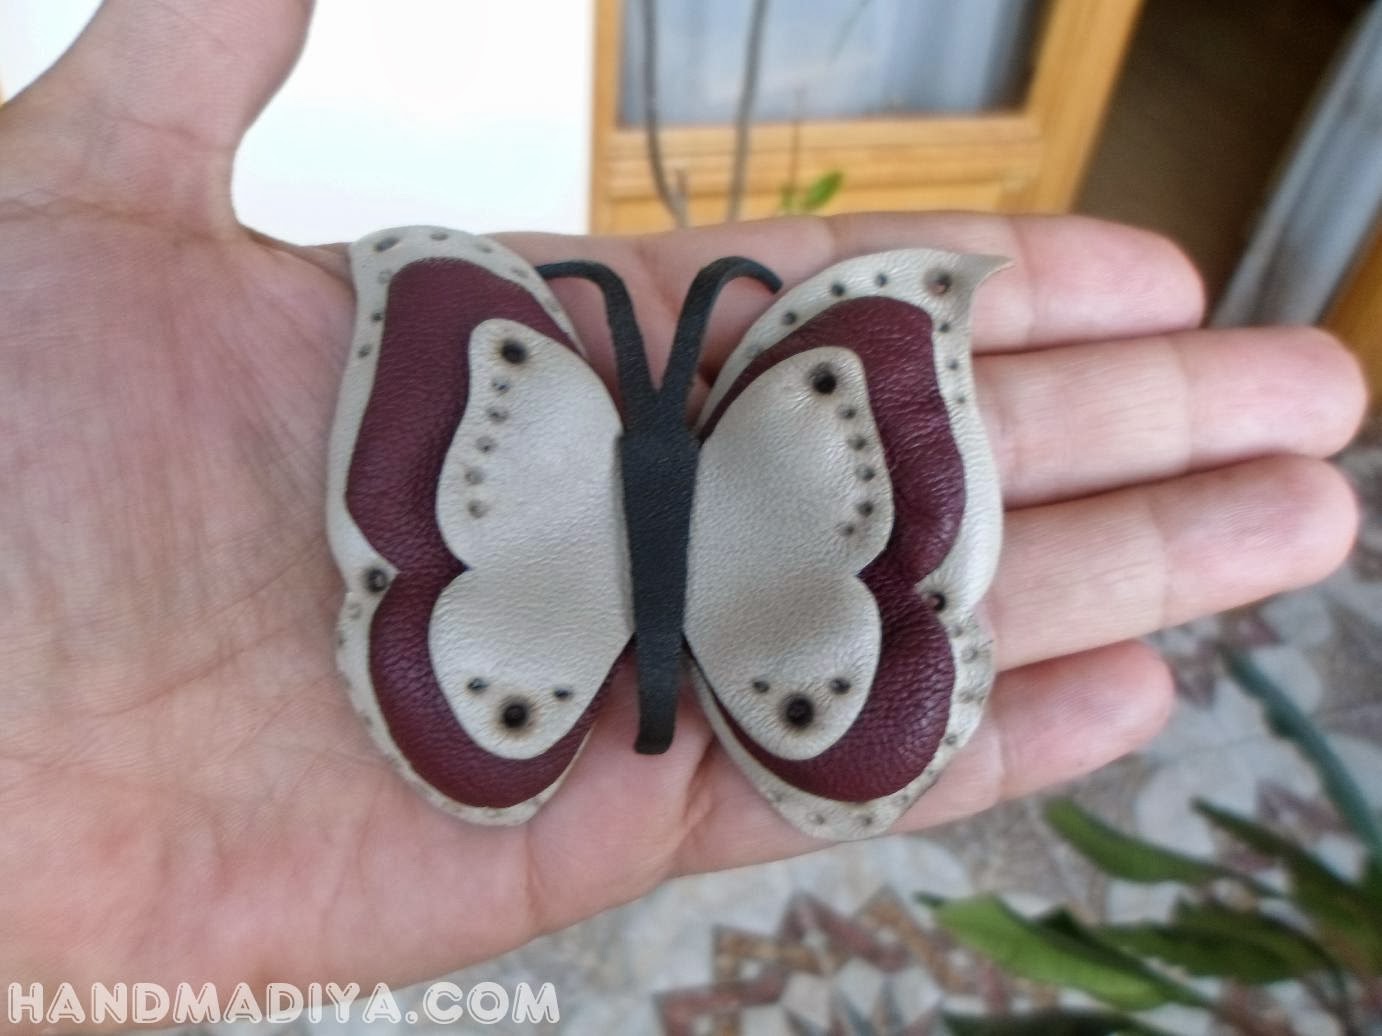  Barrette Butterfly leather DIY step-by-step tutorials